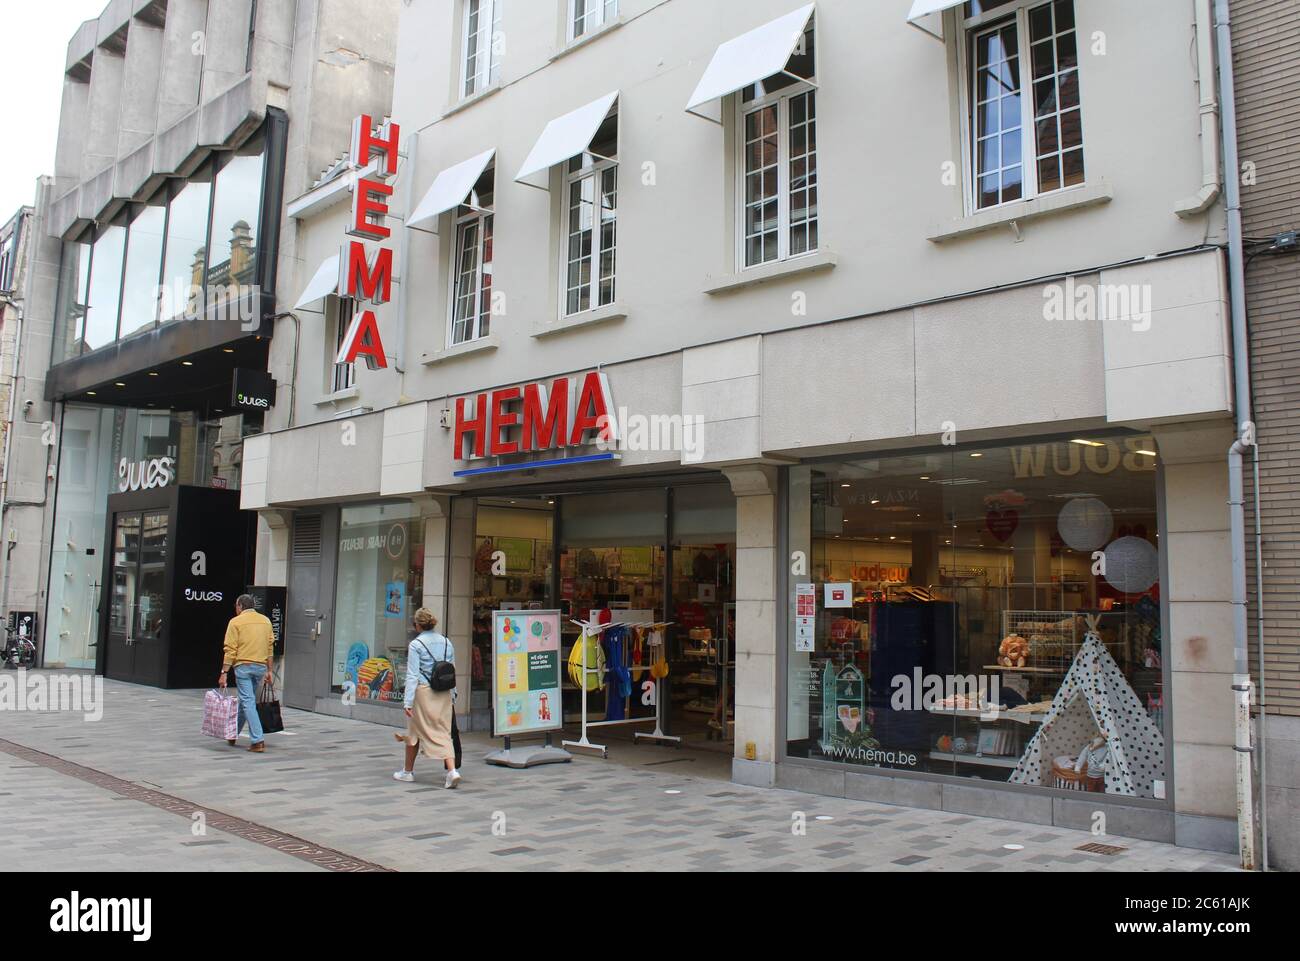 AALST, BELGIUM, 6 JULY 2020: Exterior view of a HEMA retail store in Flanders. HEMA is a Dutch multinational variety store-chain, characterized by rel Stock Photo